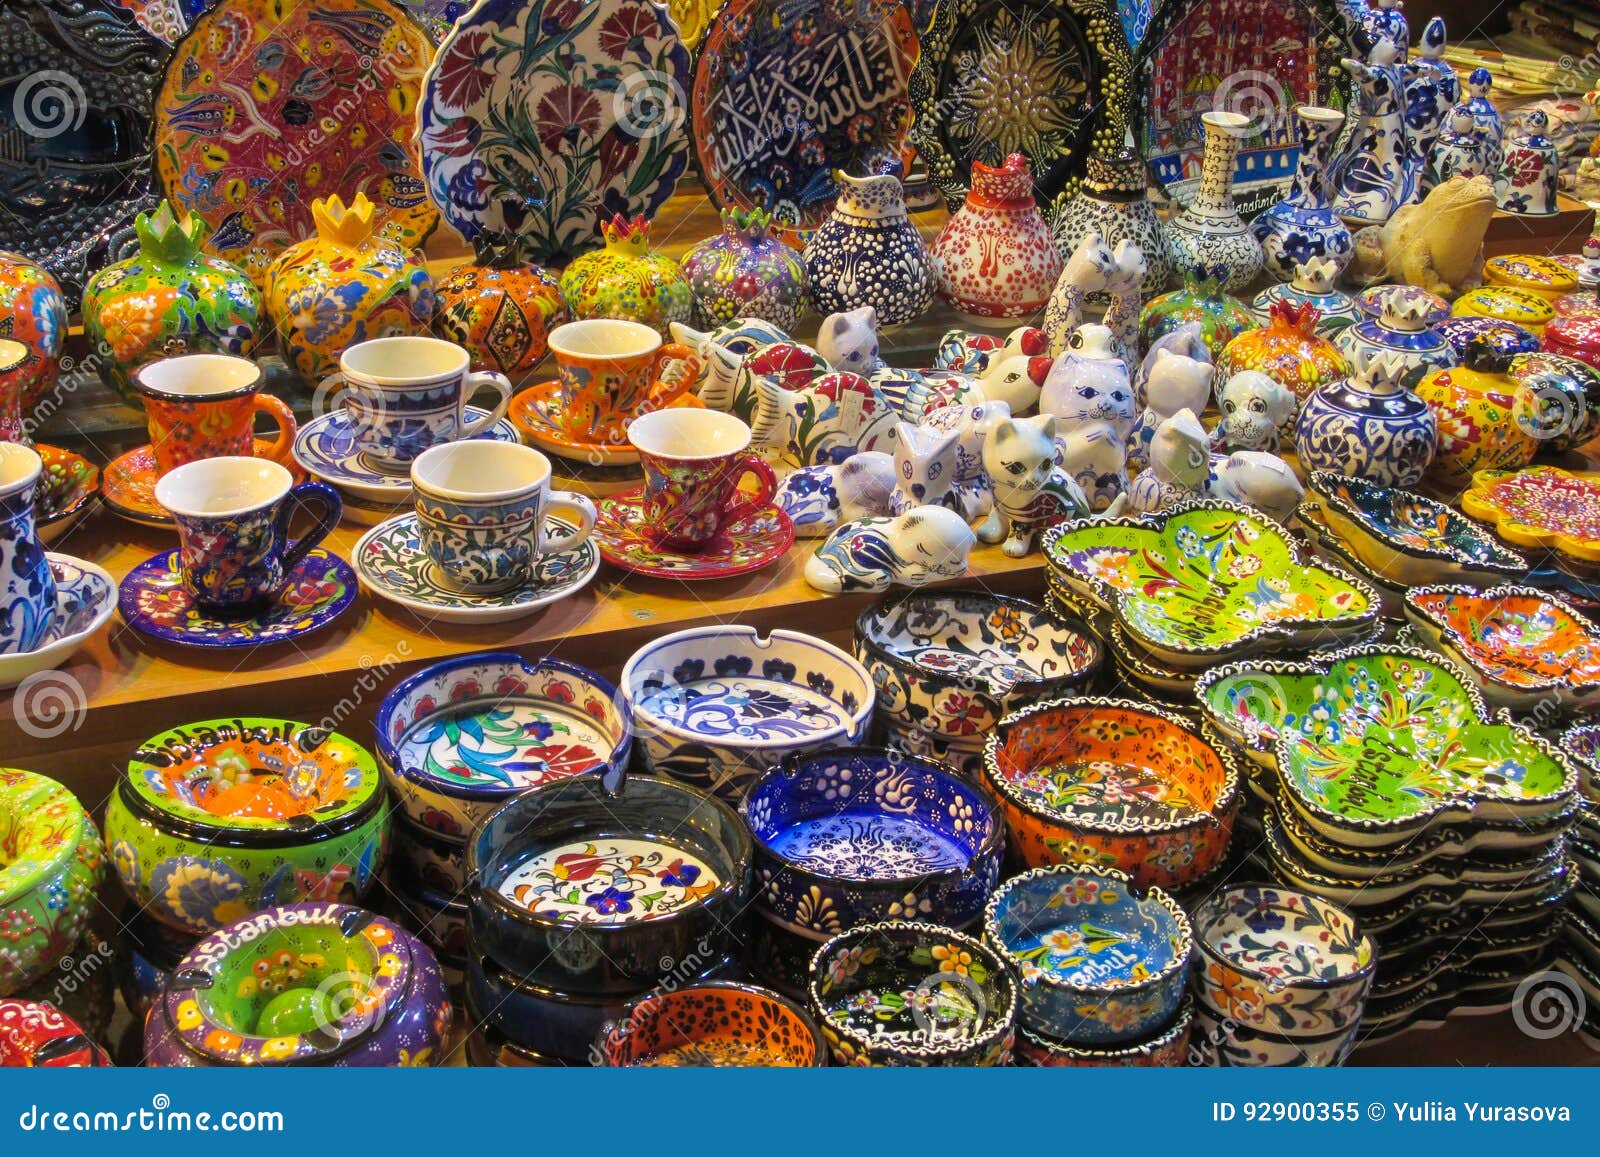 souvenirs from istanbul at grand bazar, turkey